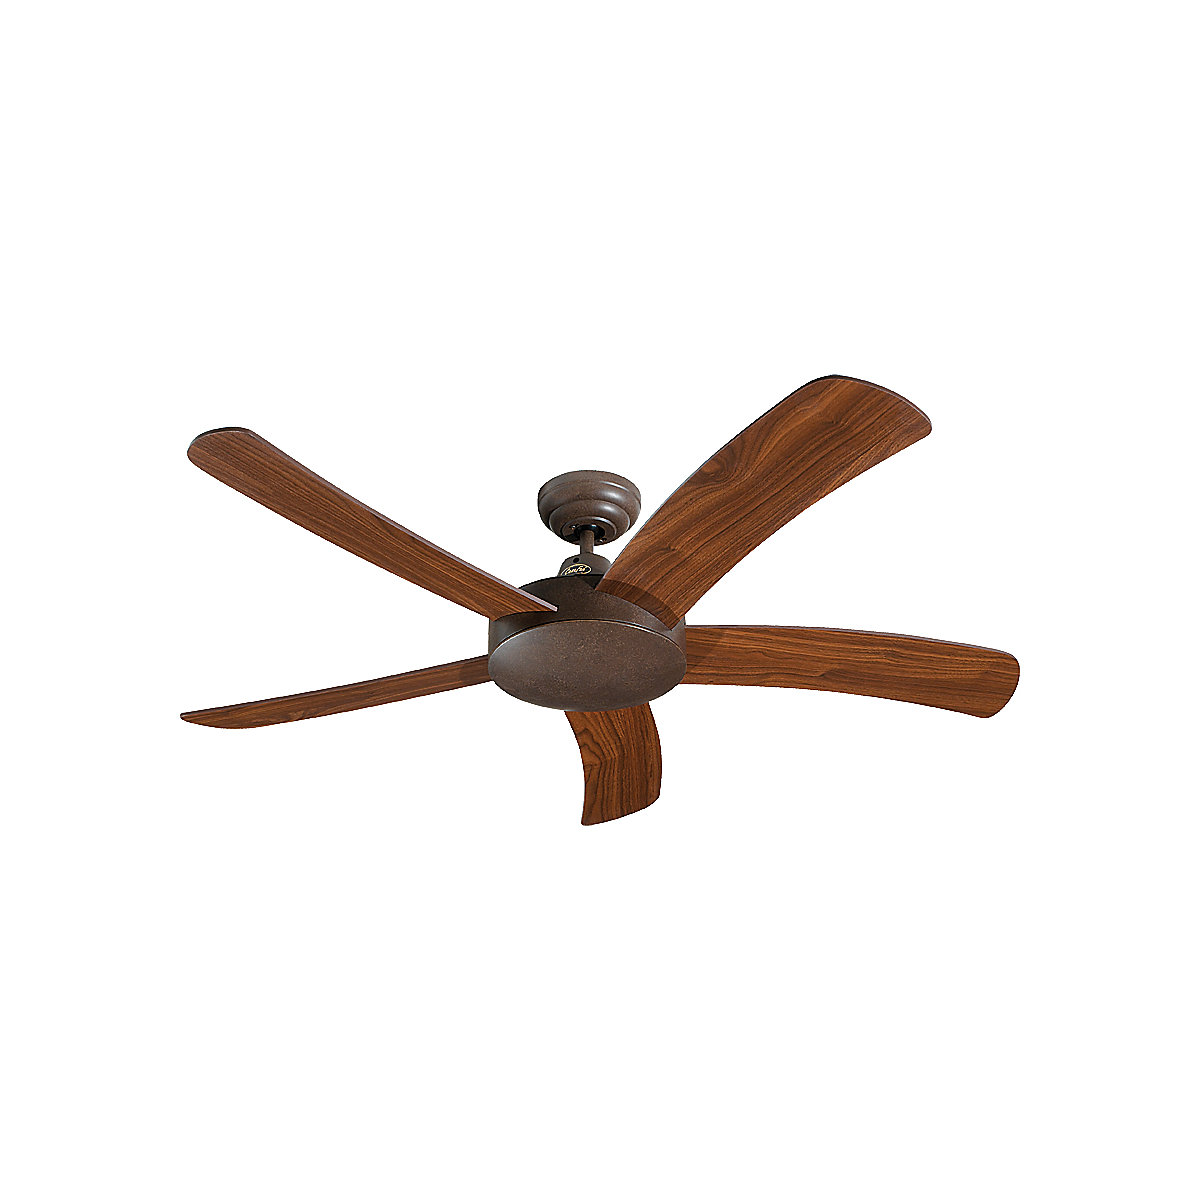 Falcetto Ceiling Fan Without Remote, How To Control Ceiling Fan Without Remote